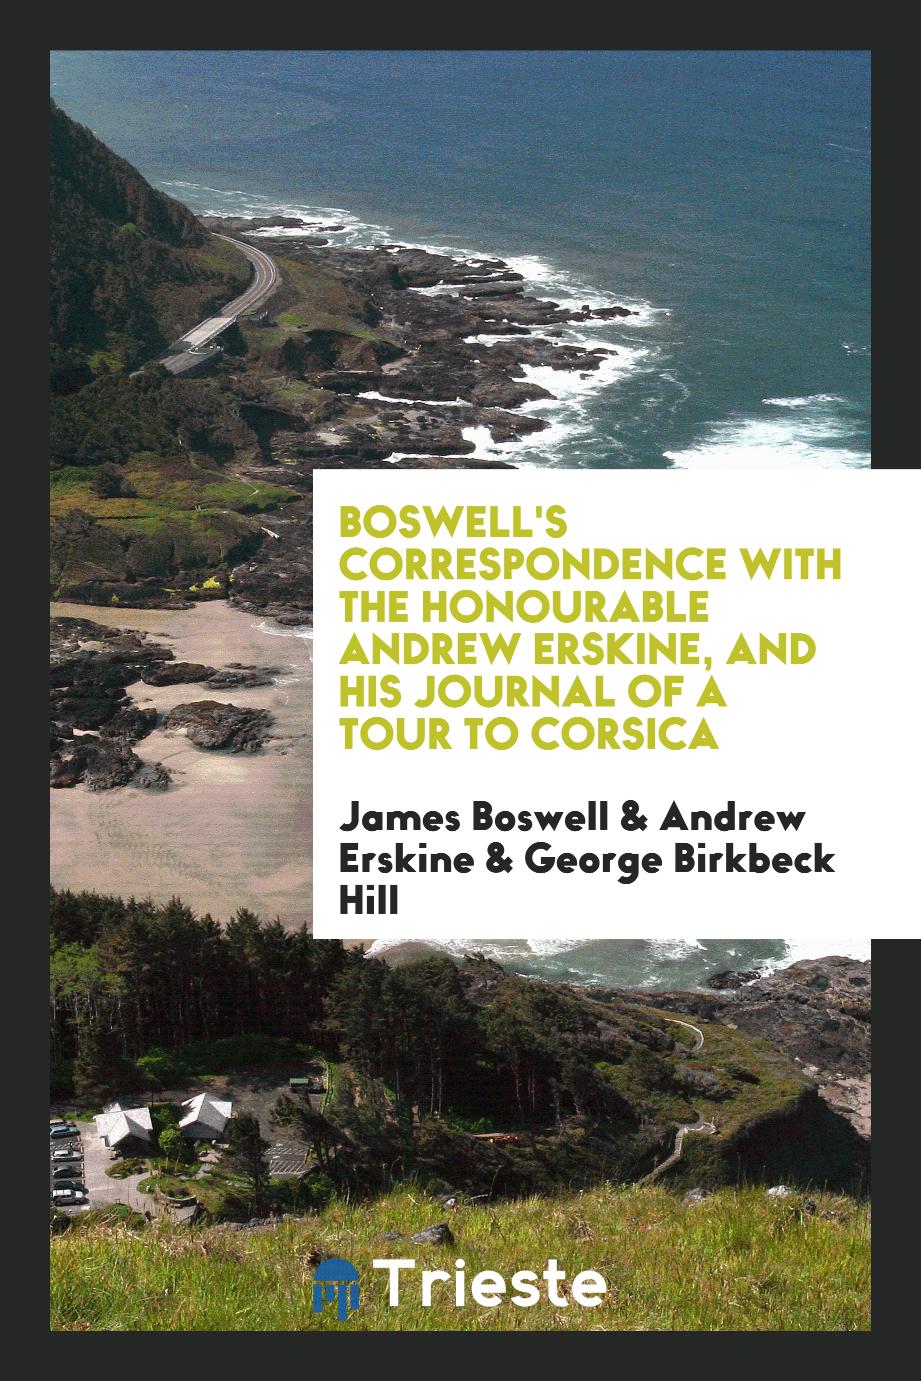 Boswell's correspondence with the Honourable Andrew Erskine, and his Journal of a tour to Corsica